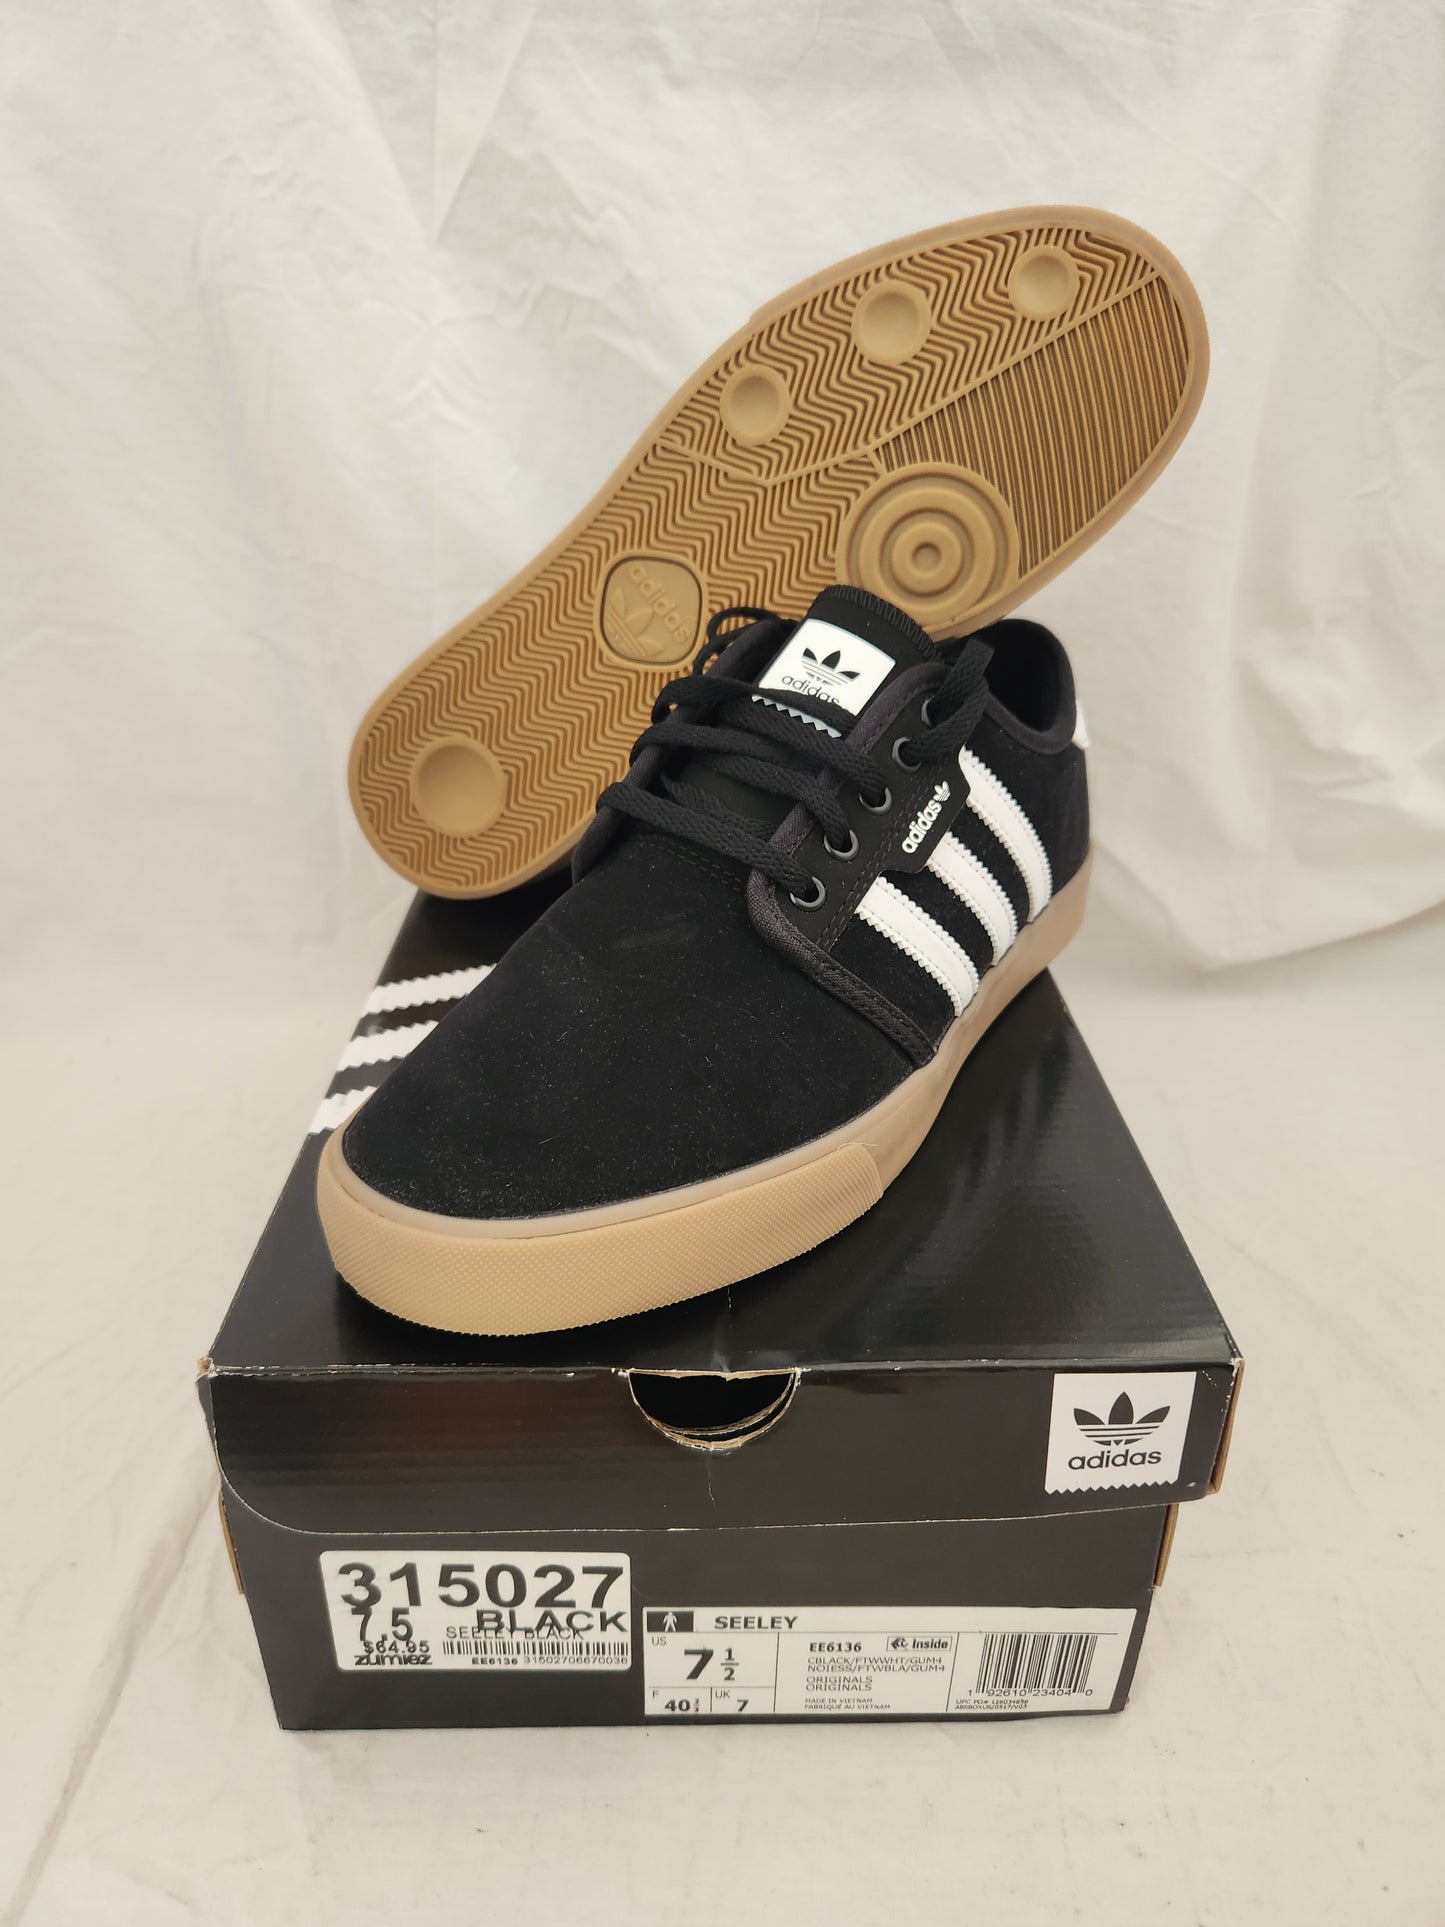 Adidas Seeley Men's Black and Sneakers - Size 7.5 –